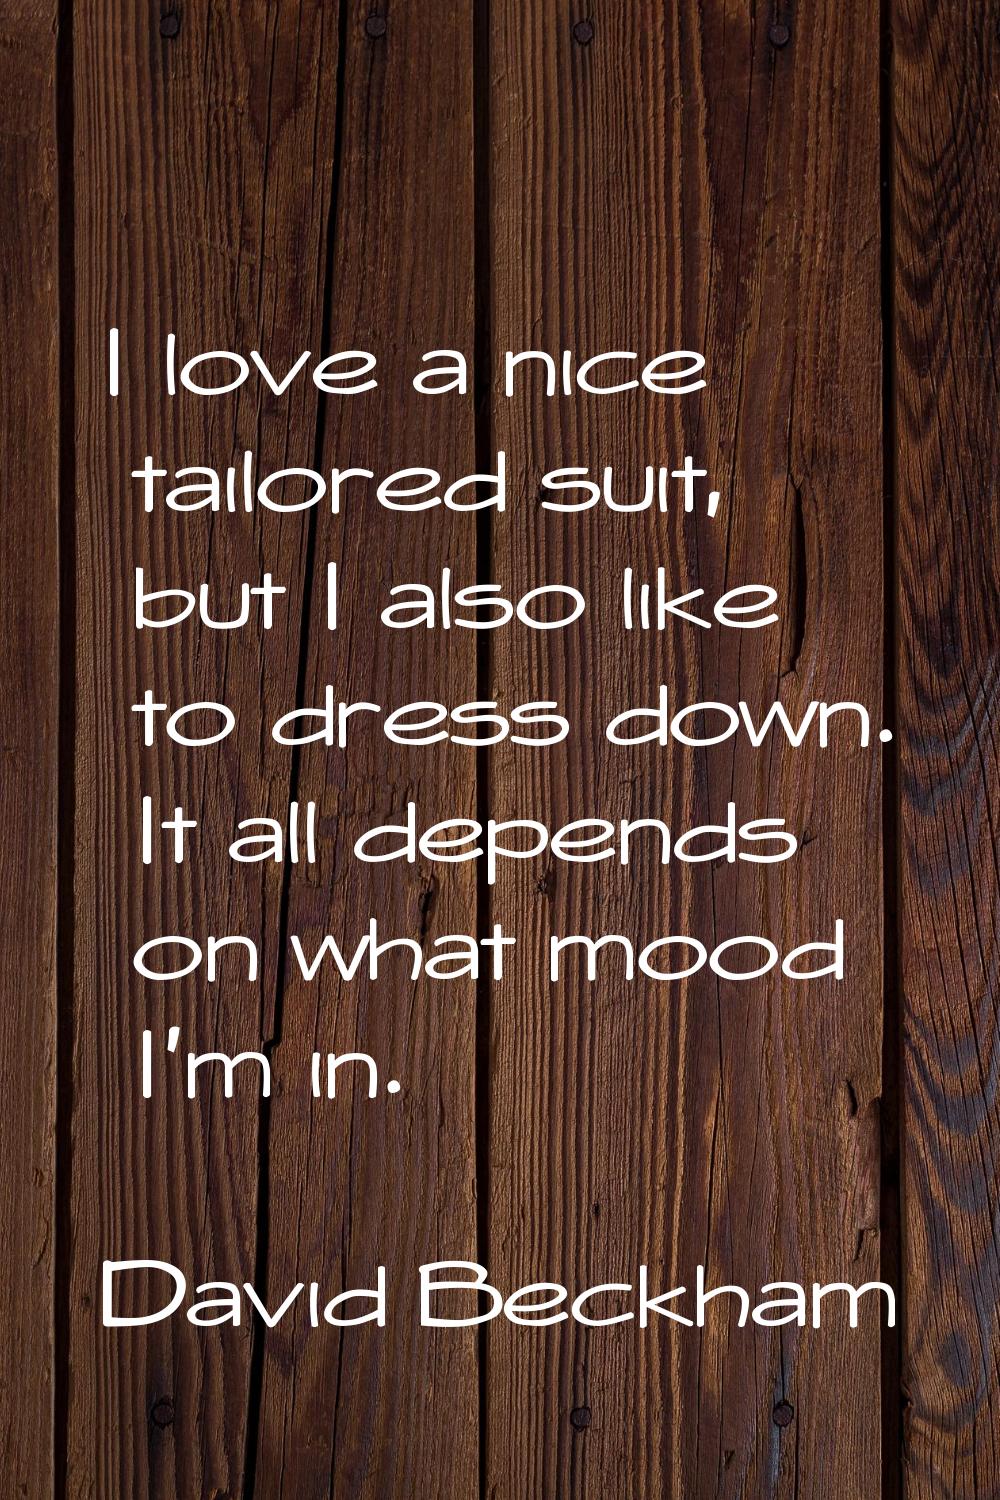 I love a nice tailored suit, but I also like to dress down. It all depends on what mood I'm in.